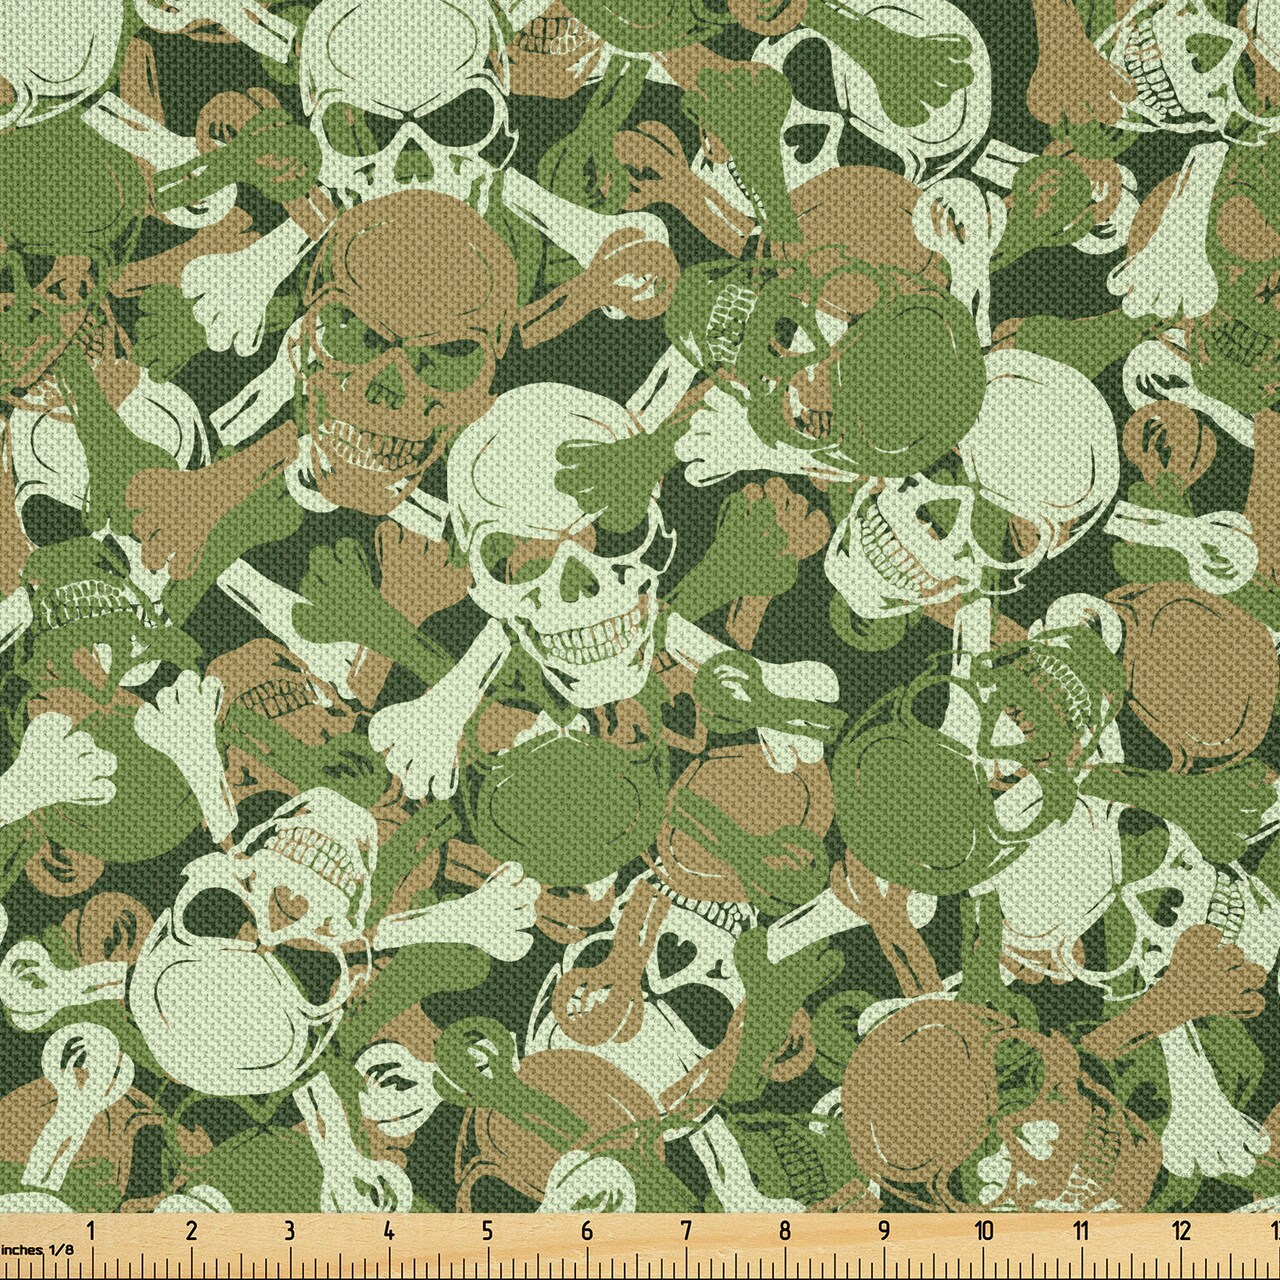 Ambesonne Camo Fabric by The Yard, Sketchy Skulls and Crossbones Warning Sign Spooky Scary Horror Tile, Decorative Satin Fabric for Home Textiles and Crafts, 5 Yards, Green Brown